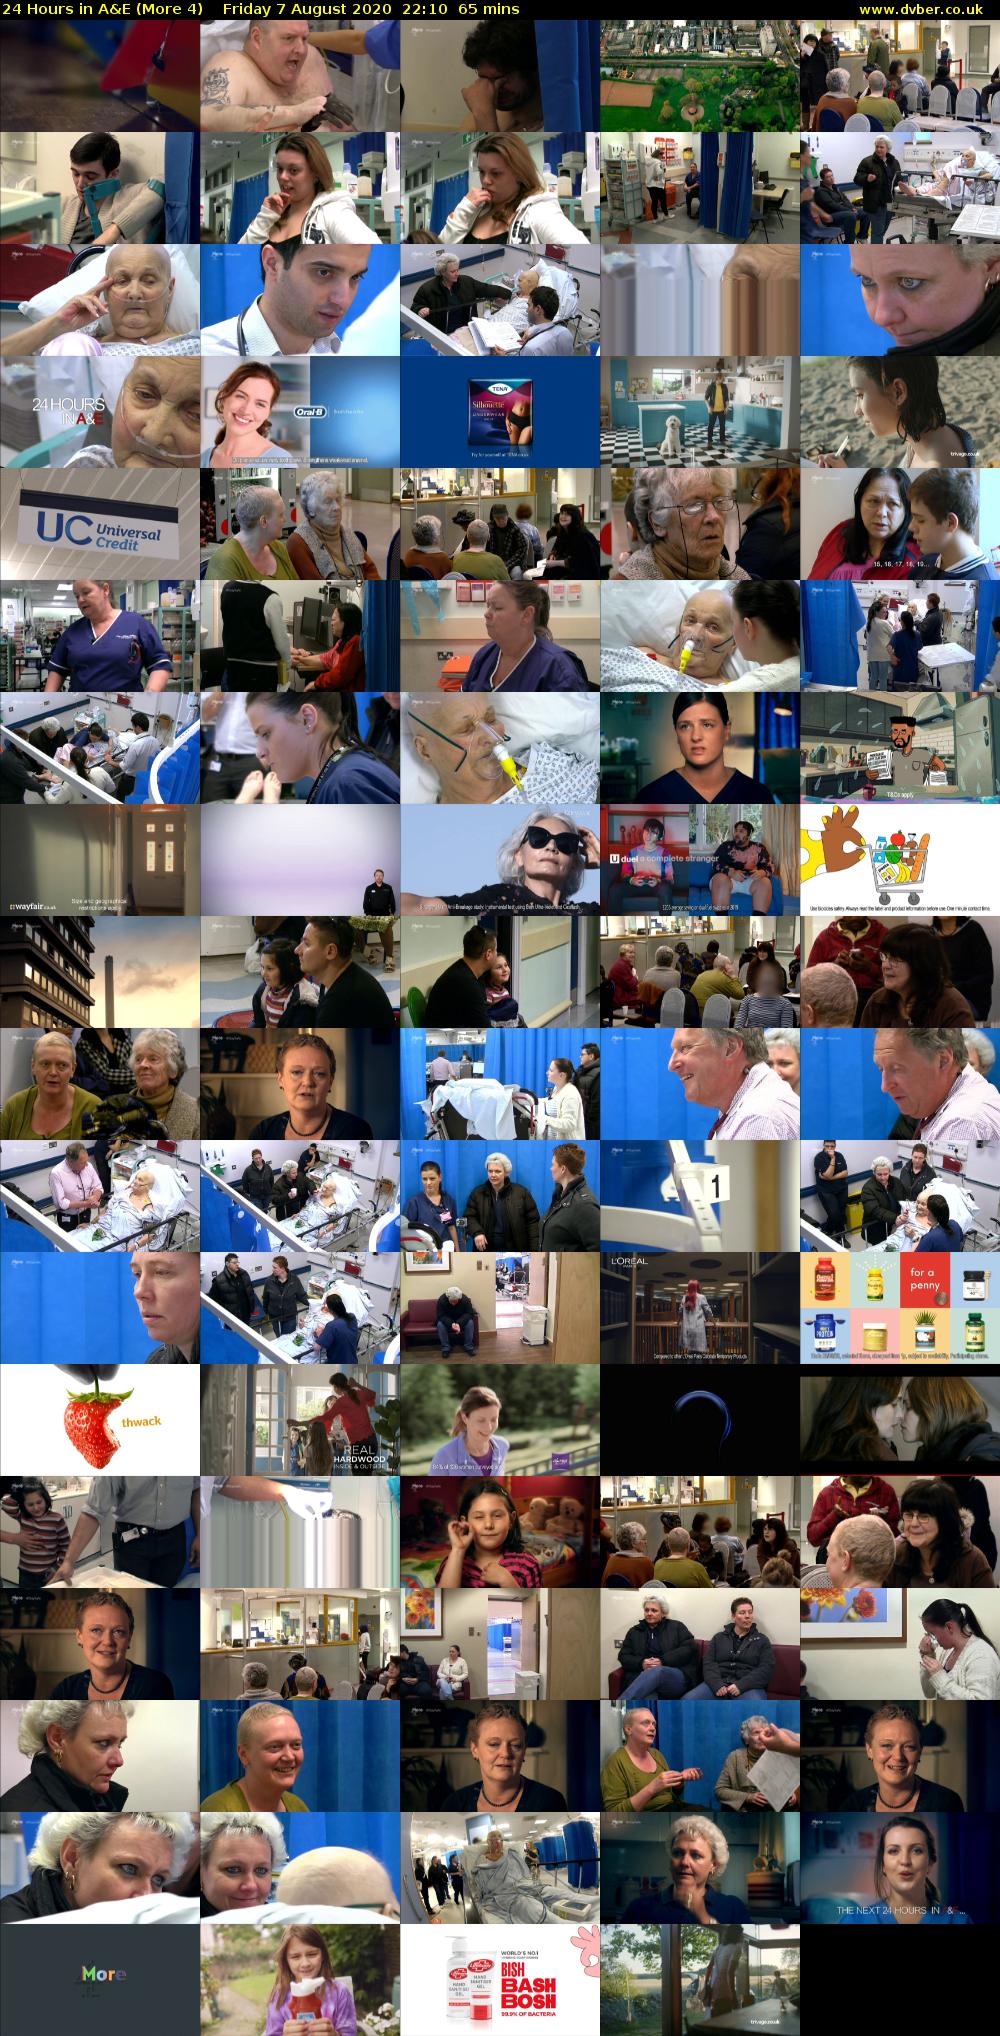 24 Hours in A&E (More 4) Friday 7 August 2020 22:10 - 23:15